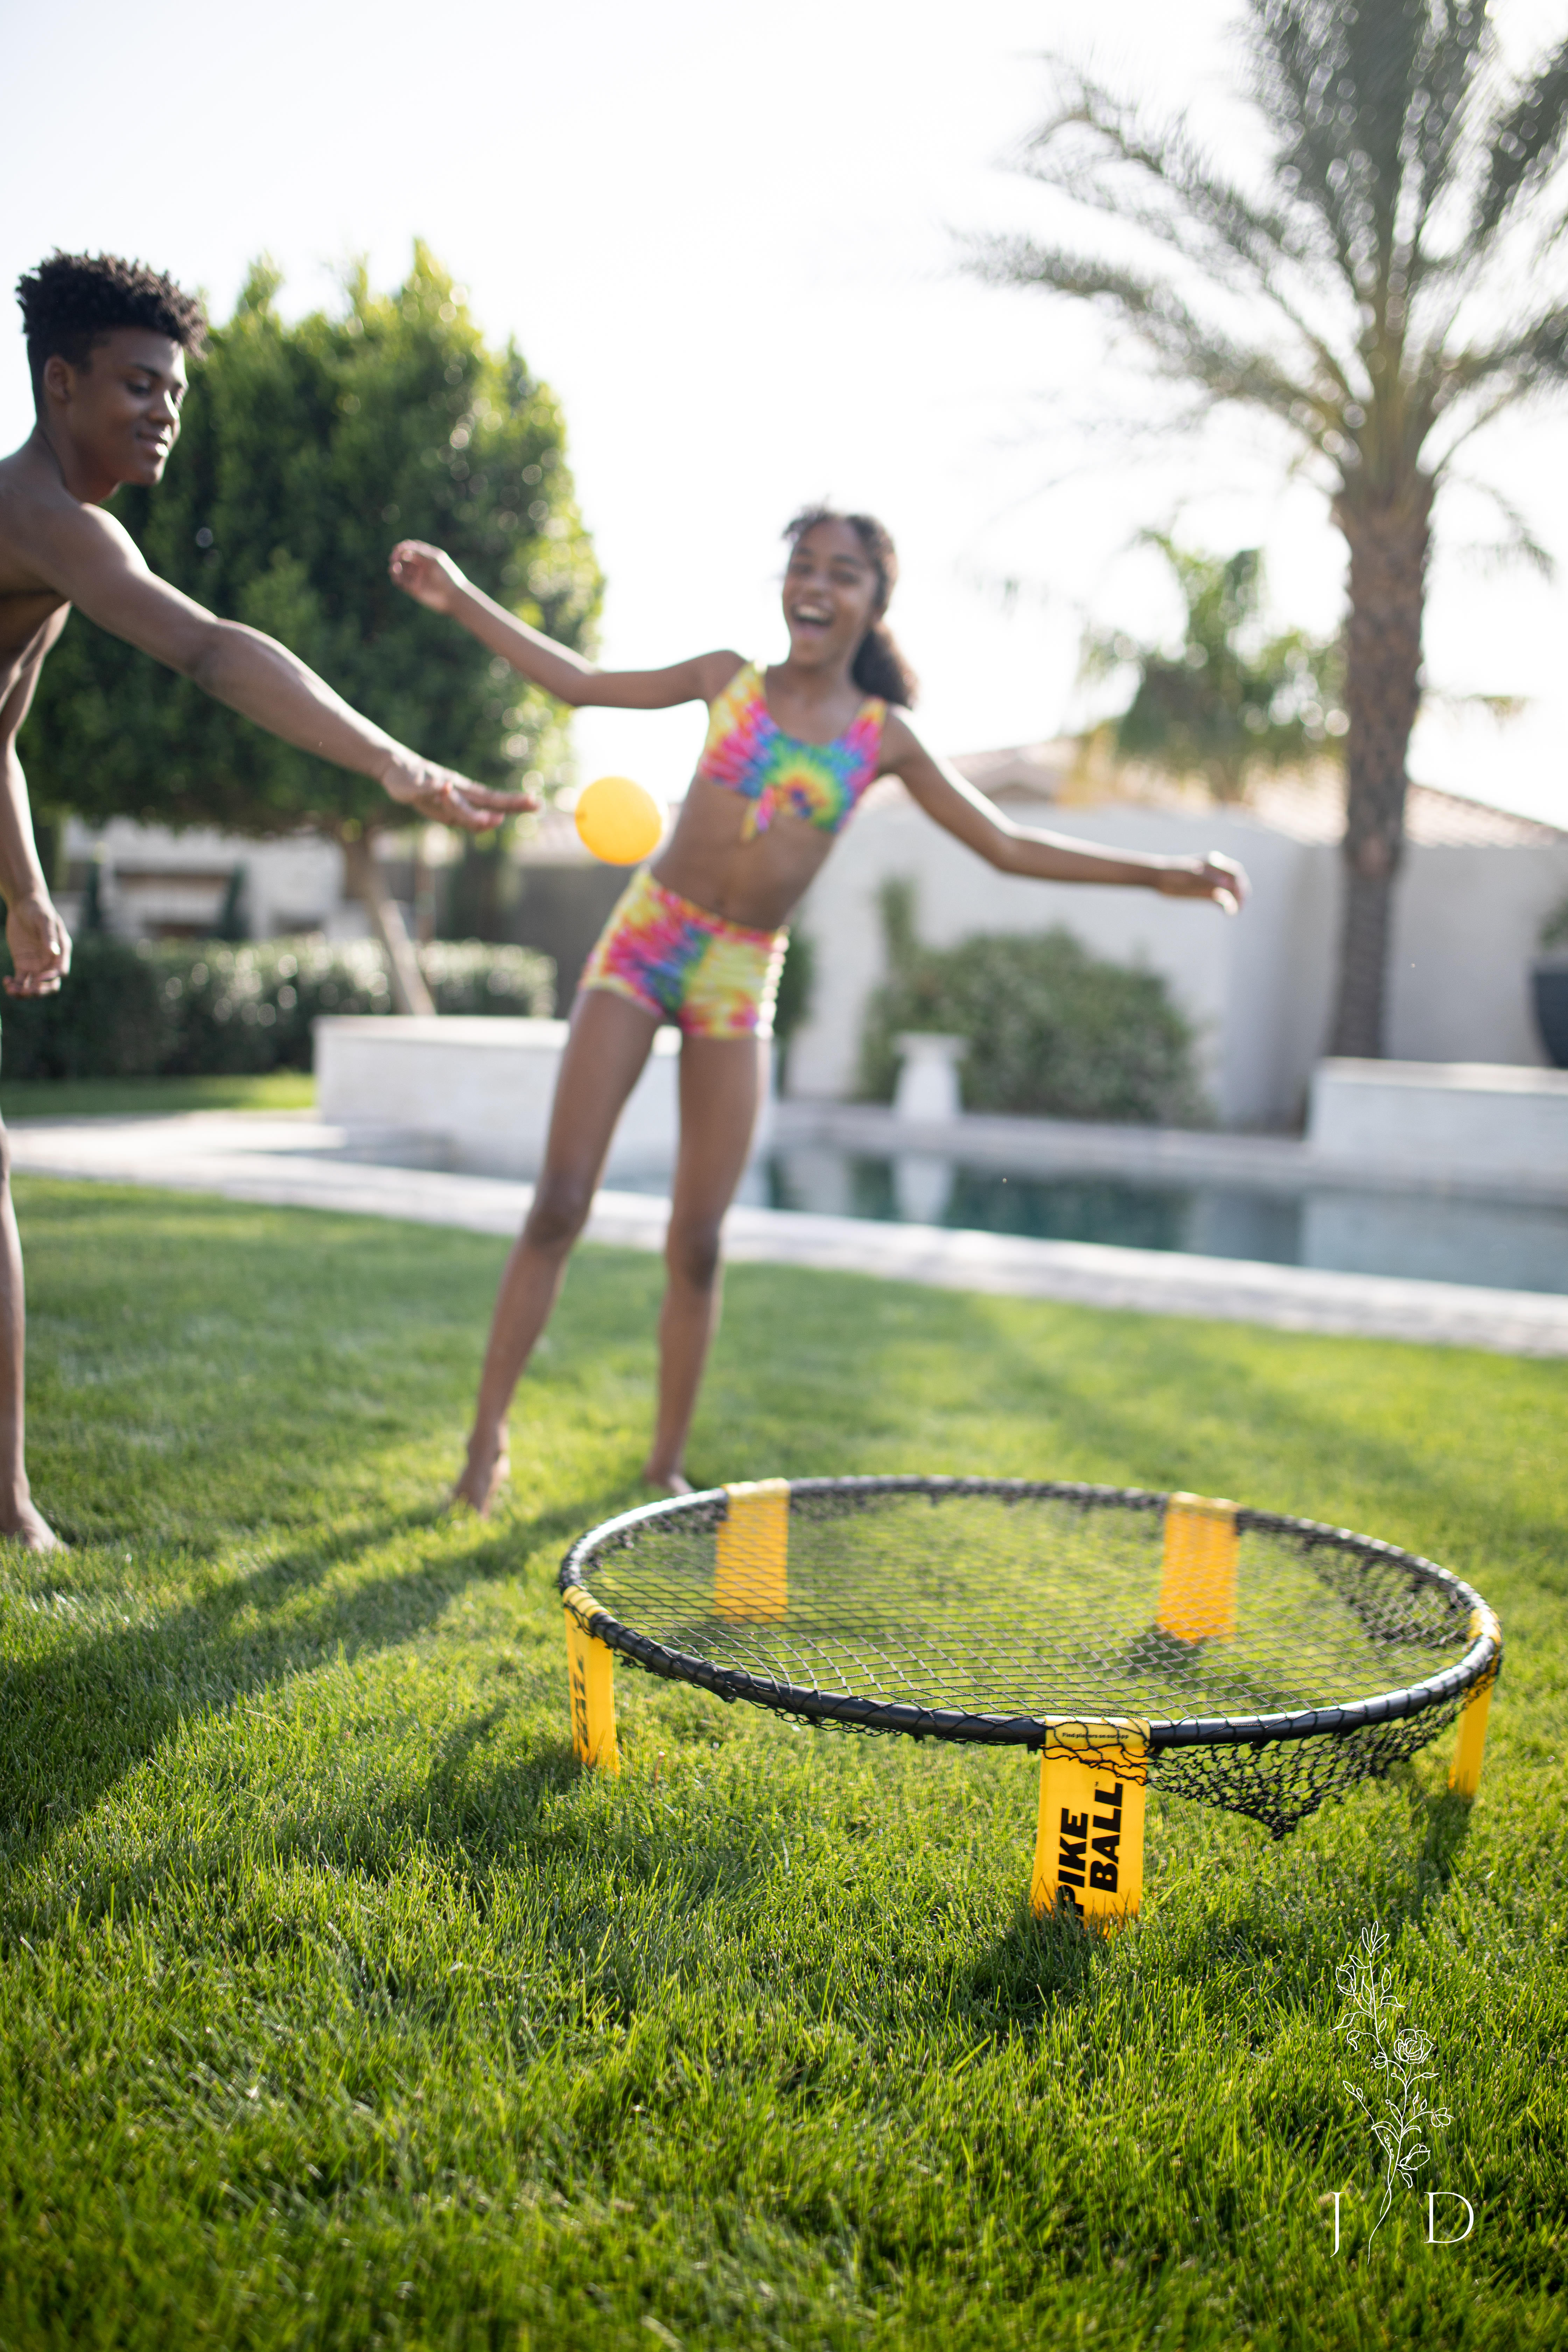 Spikeball being played in the backyard